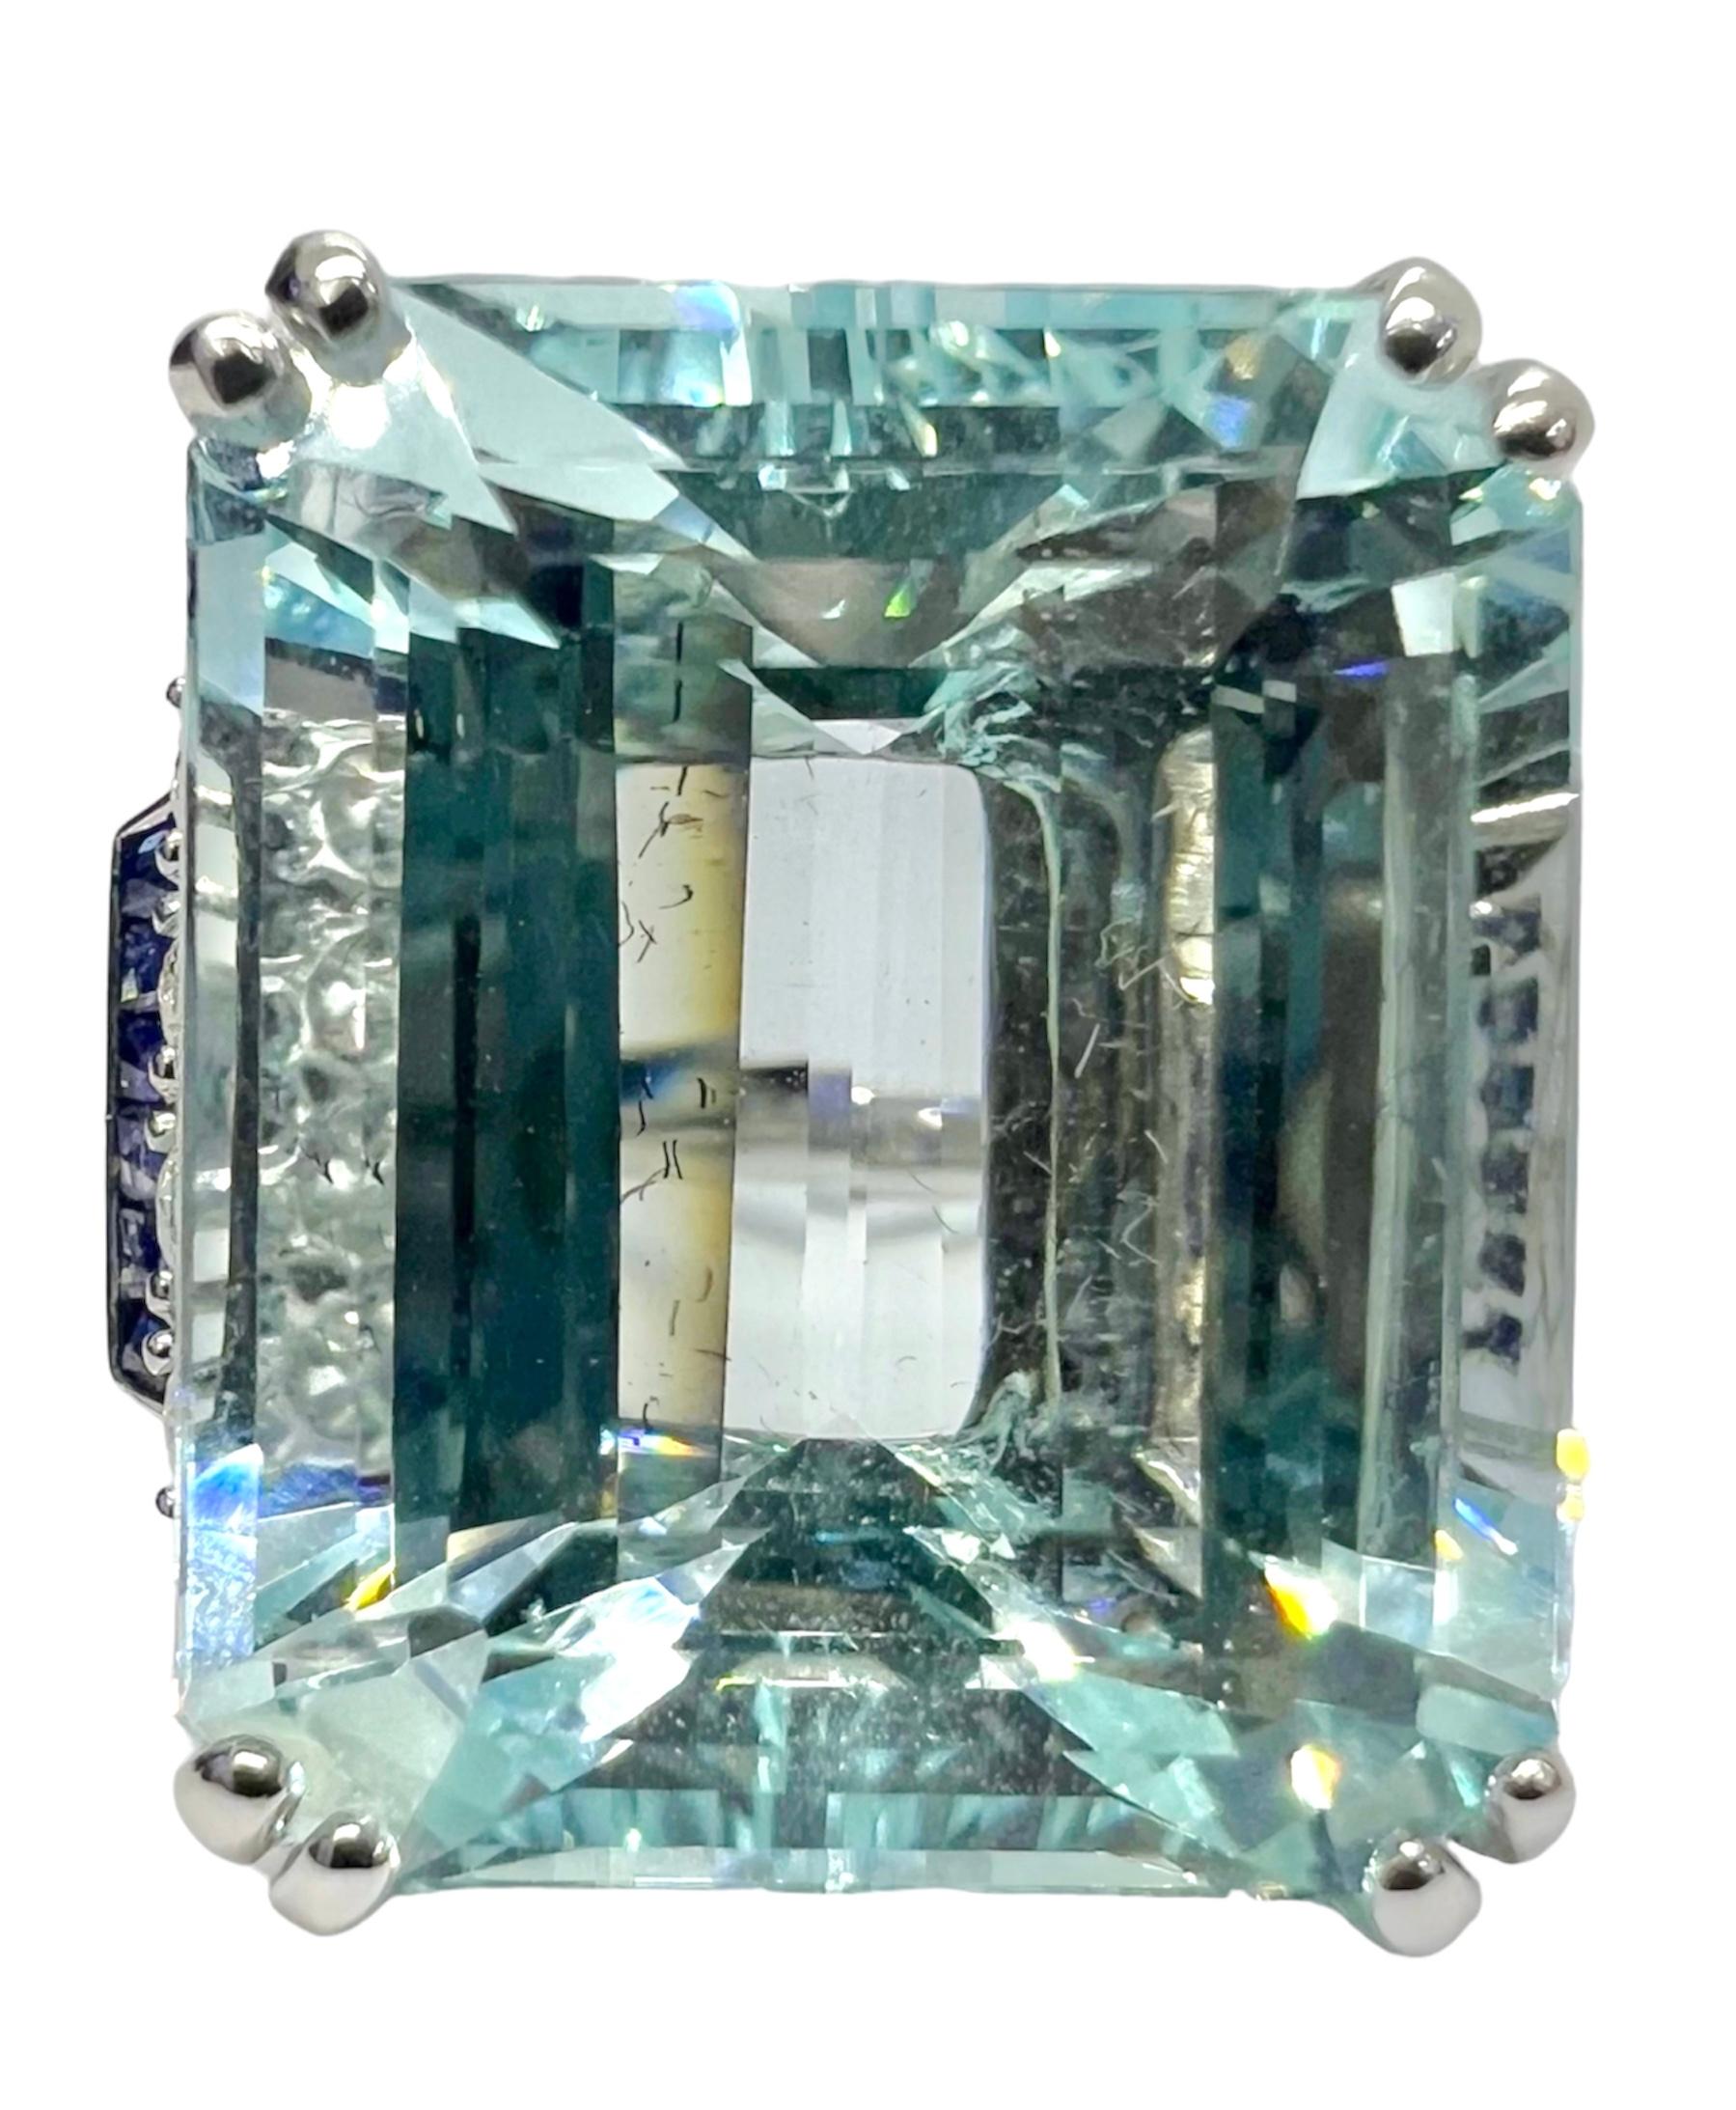 18K white gold ring with 30.93 carat aquamarine, 0.68 carat diamond and 0.69 carat sapphire. 

Sophia D by Joseph Dardashti LTD has been known worldwide for 35 years and are inspired by classic Art Deco design that merges with modern manufacturing